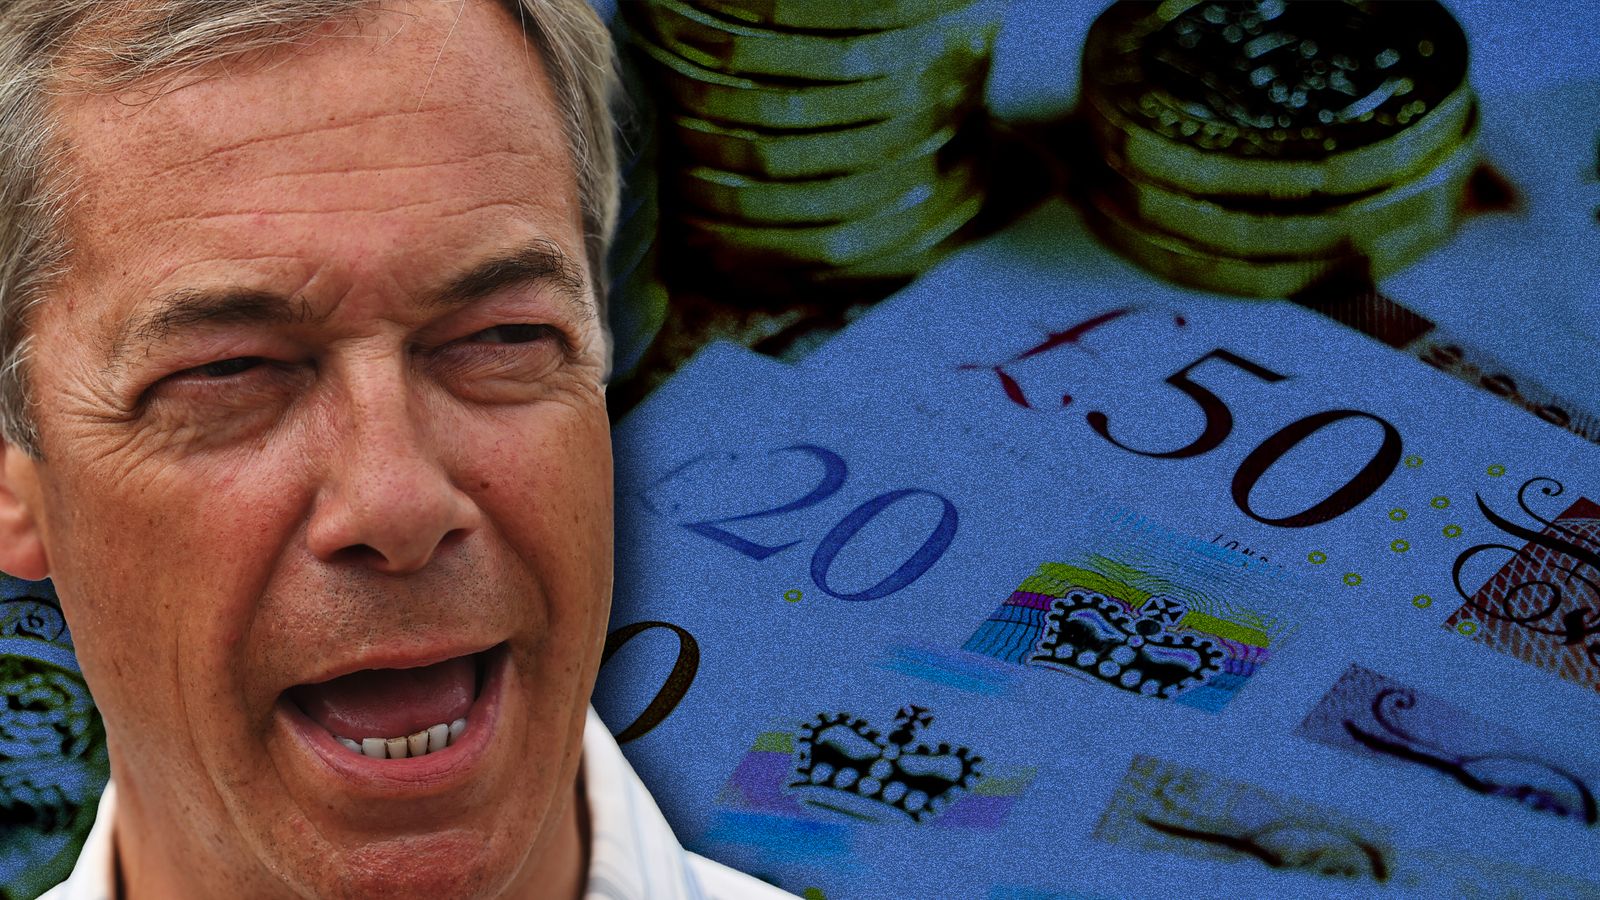 Nigel Farage and NatWest: A timeline of what happened